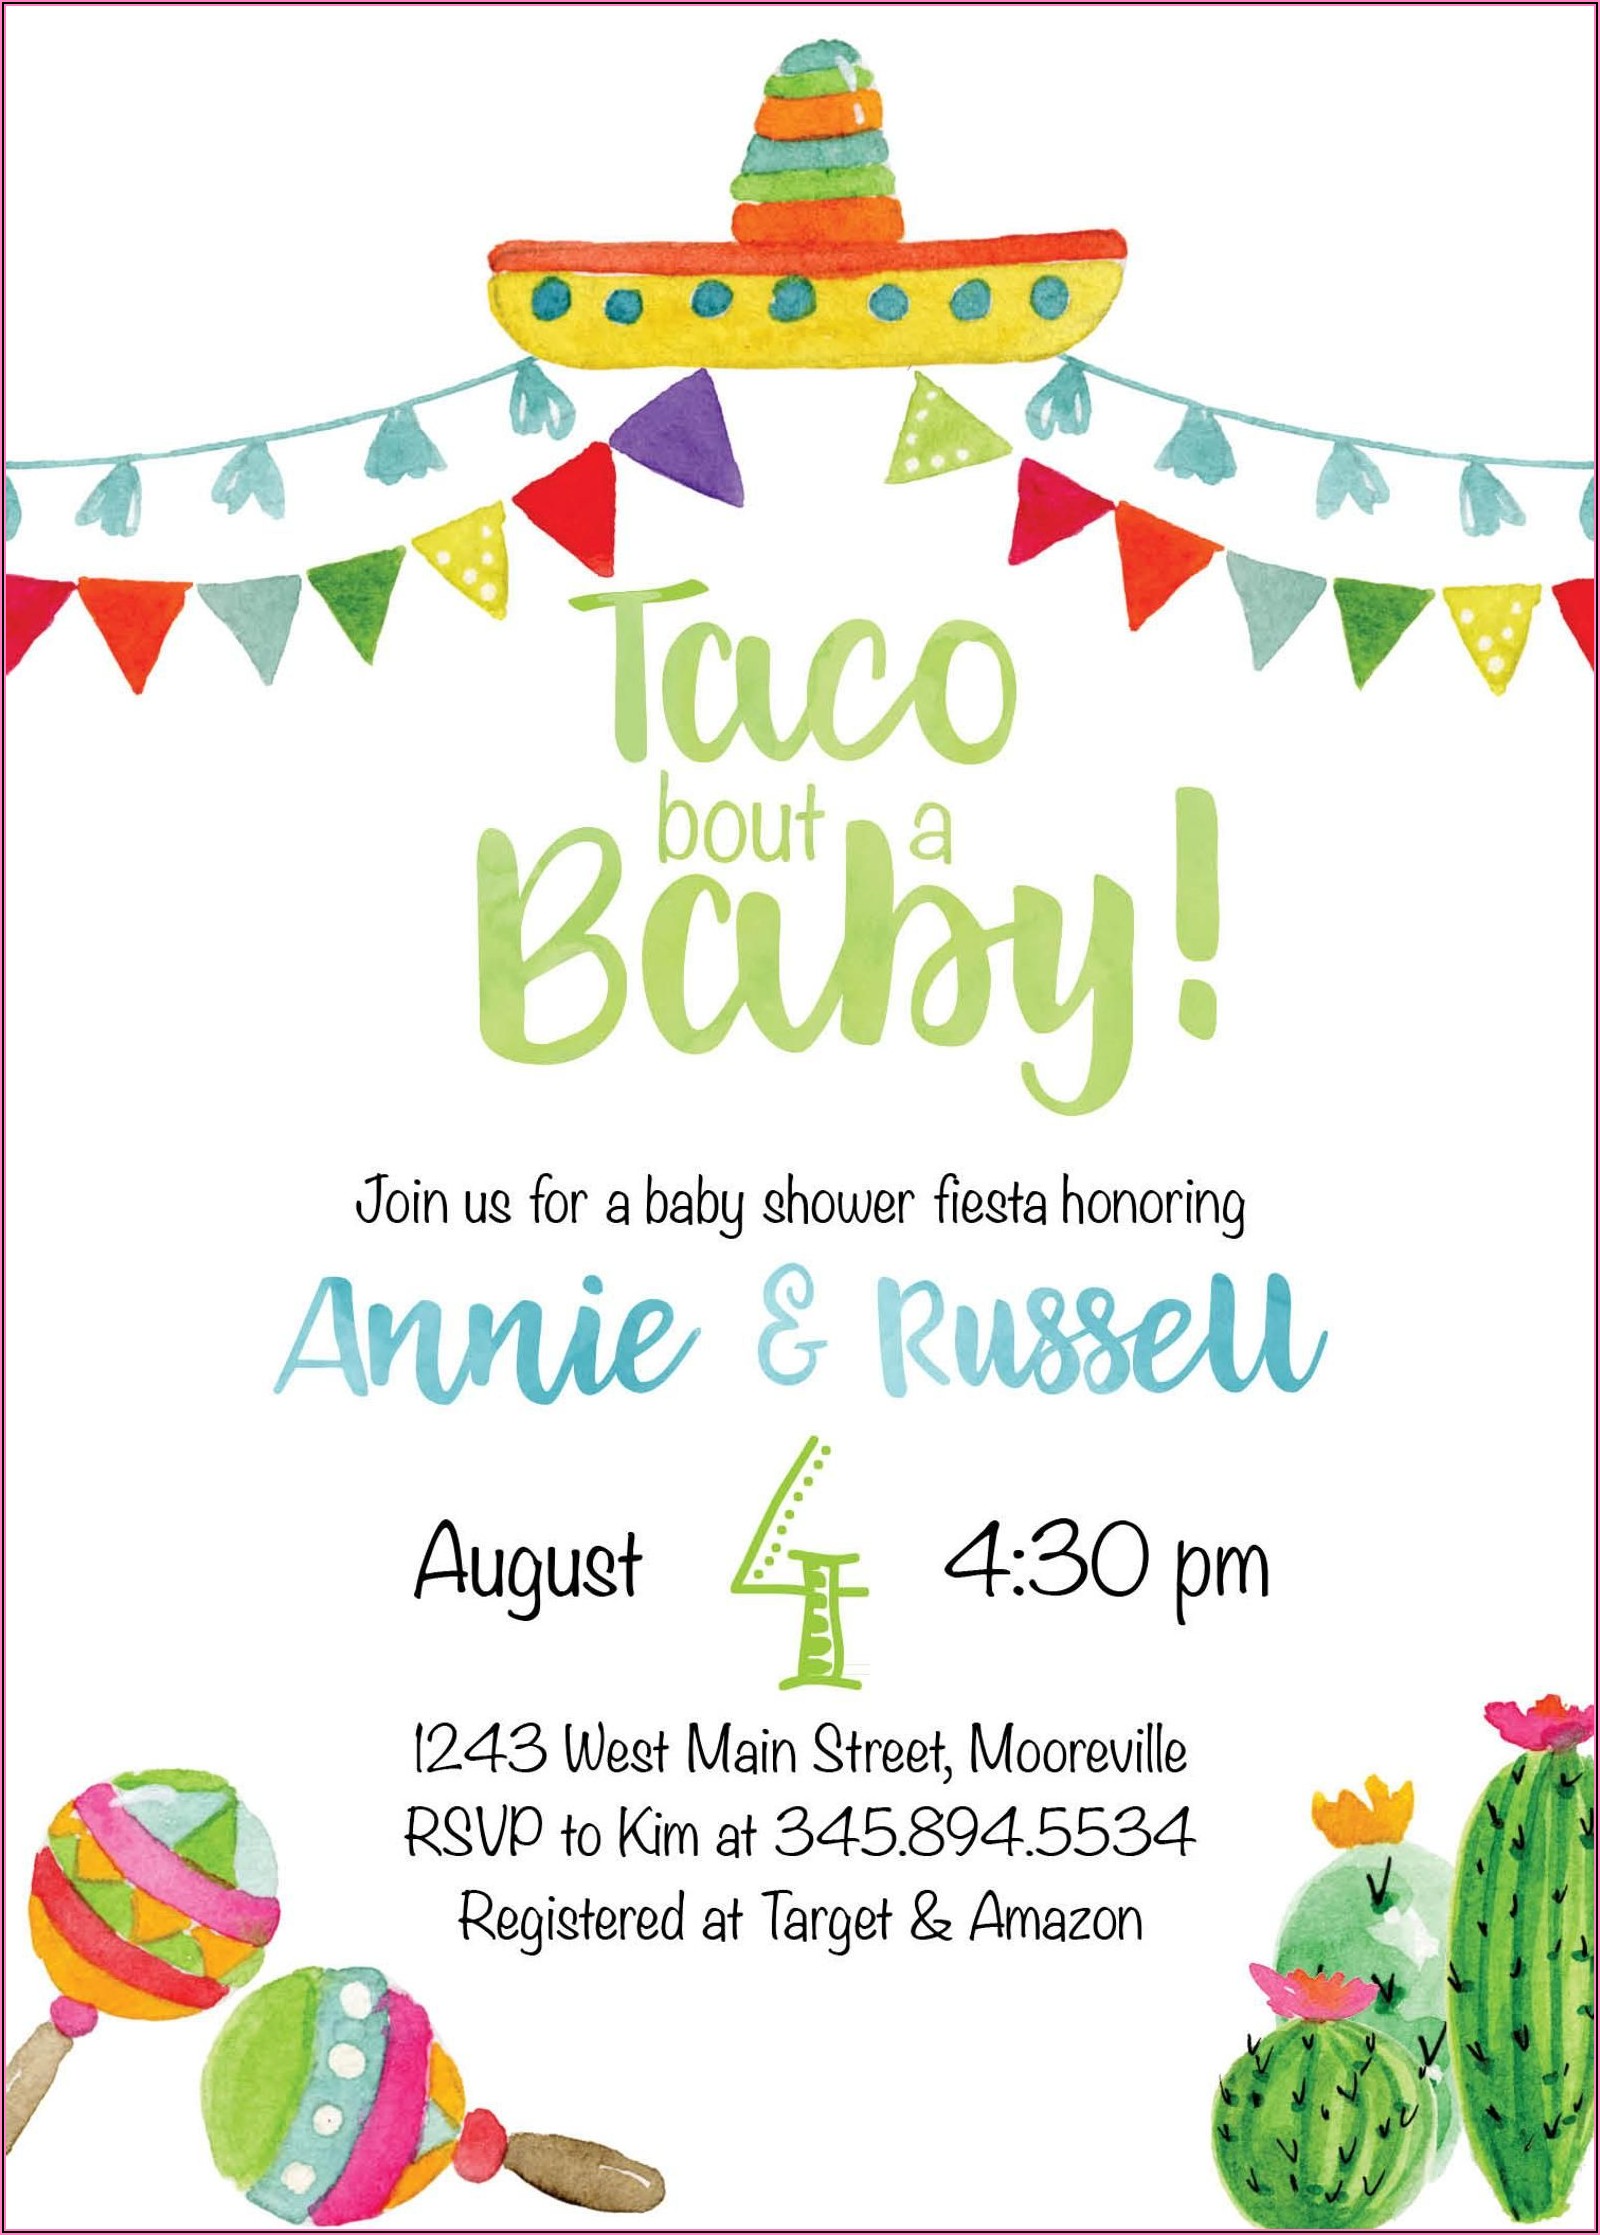 Taco Bout A Baby Invitation Template Free